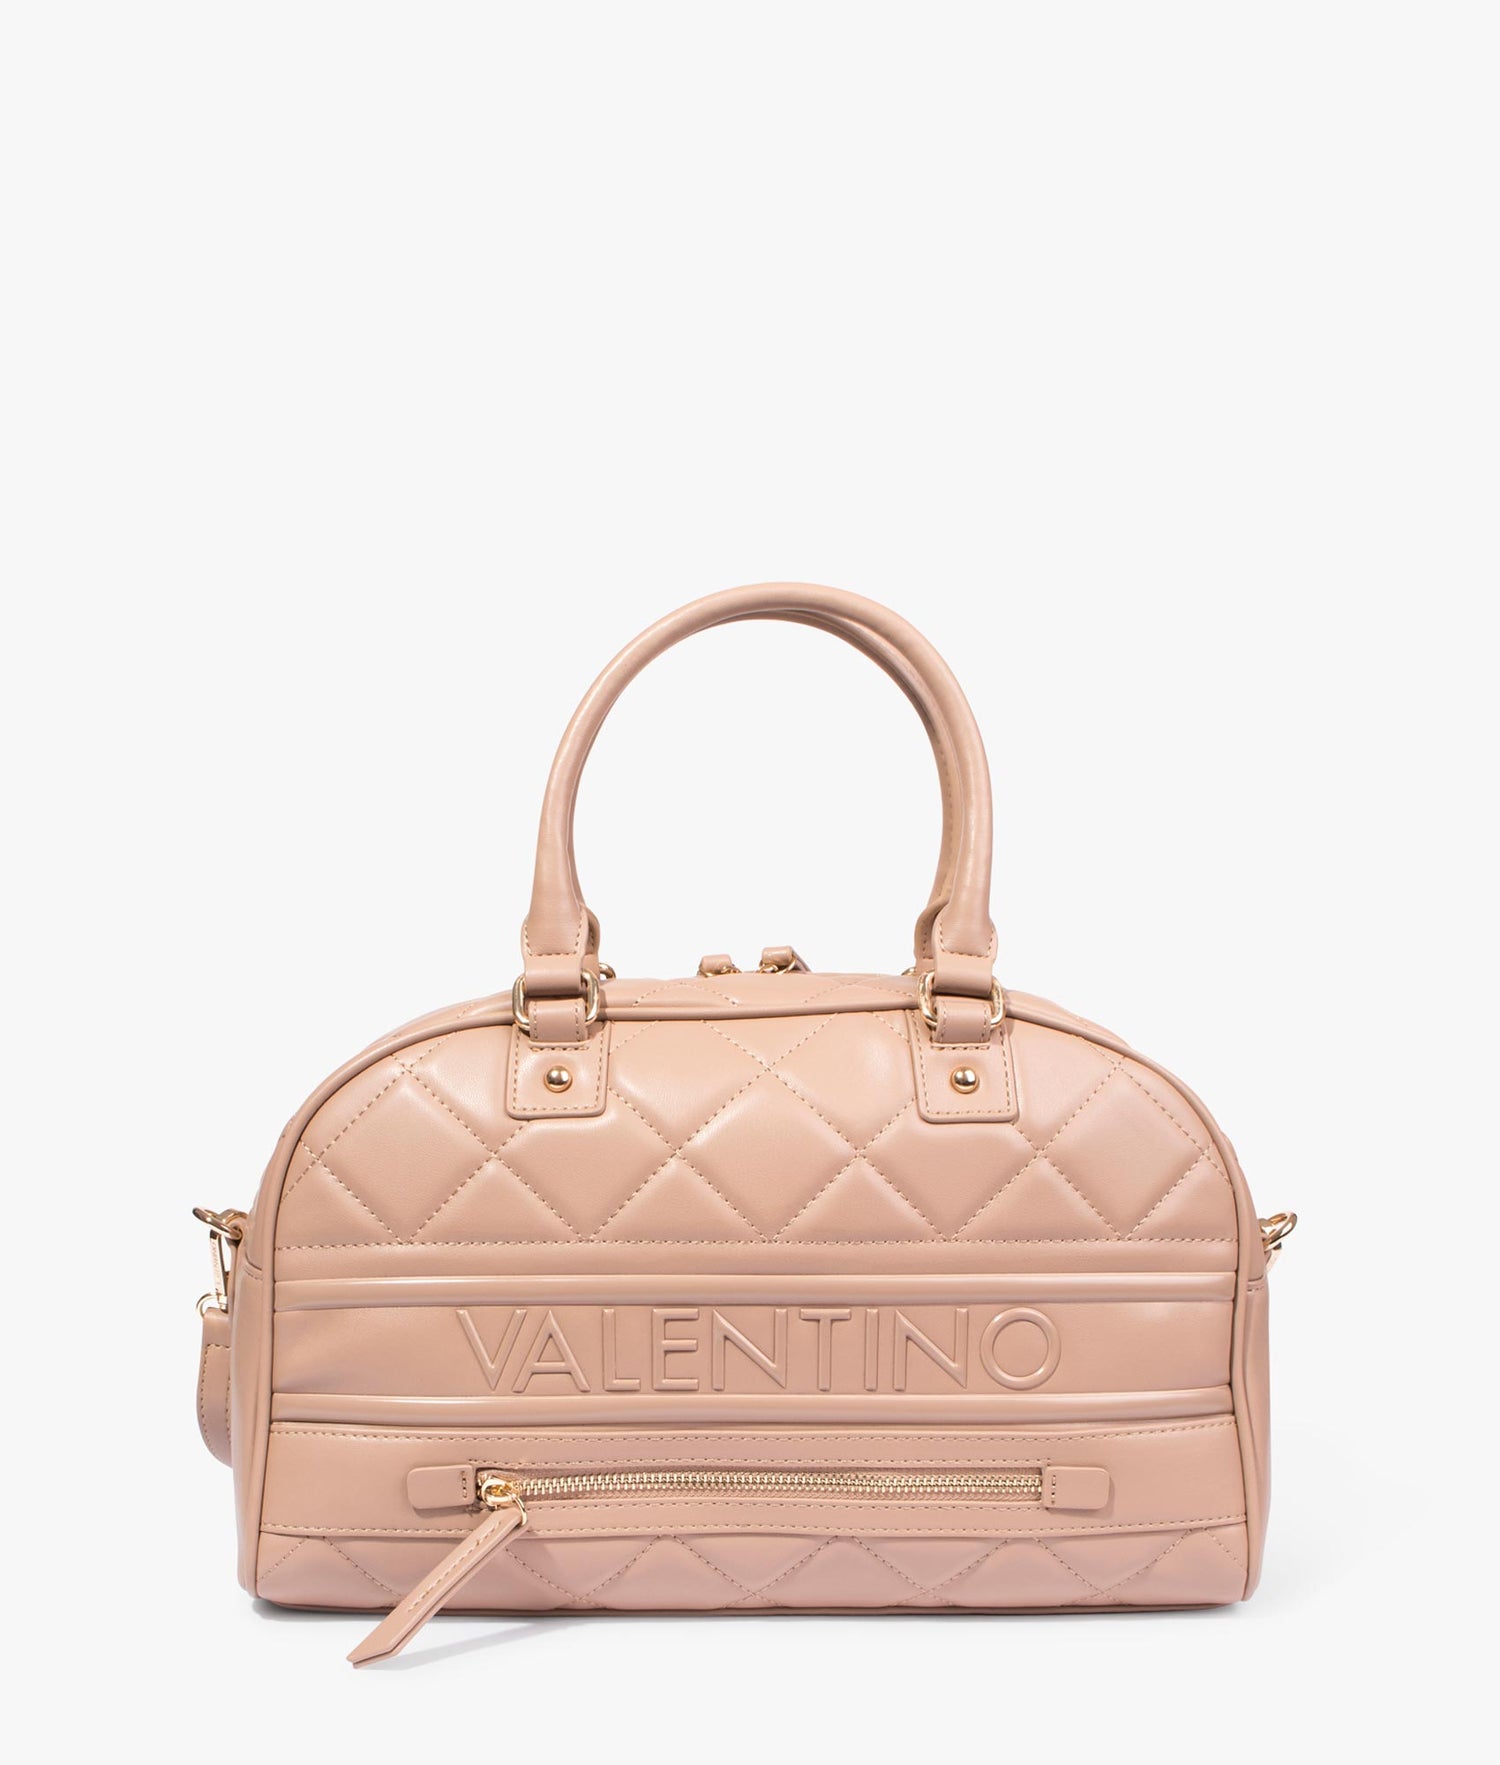 Valentino Bags Ada quilted embossed cross body bag with chain strap in black